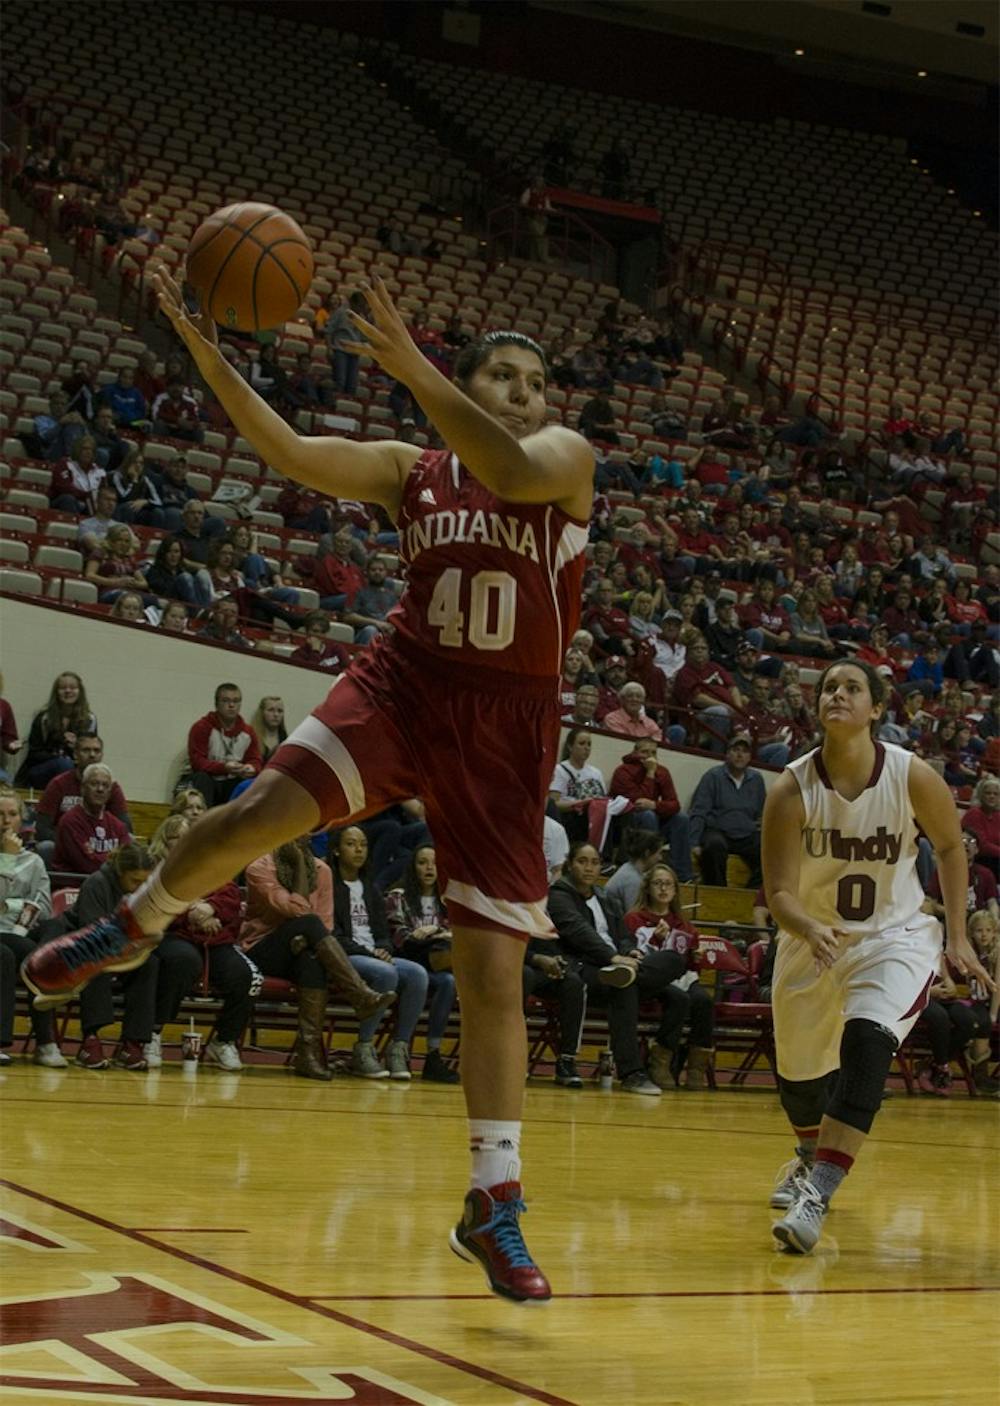 Sophomore forward Lyndsay Leikem rebounds the ball during an exhibition game against the University of Indianapolis on Nov. 9, 2014 Sunday. IU won 88-49 and will play its first regular season game this upcoming Saturday against Gardner Webb.